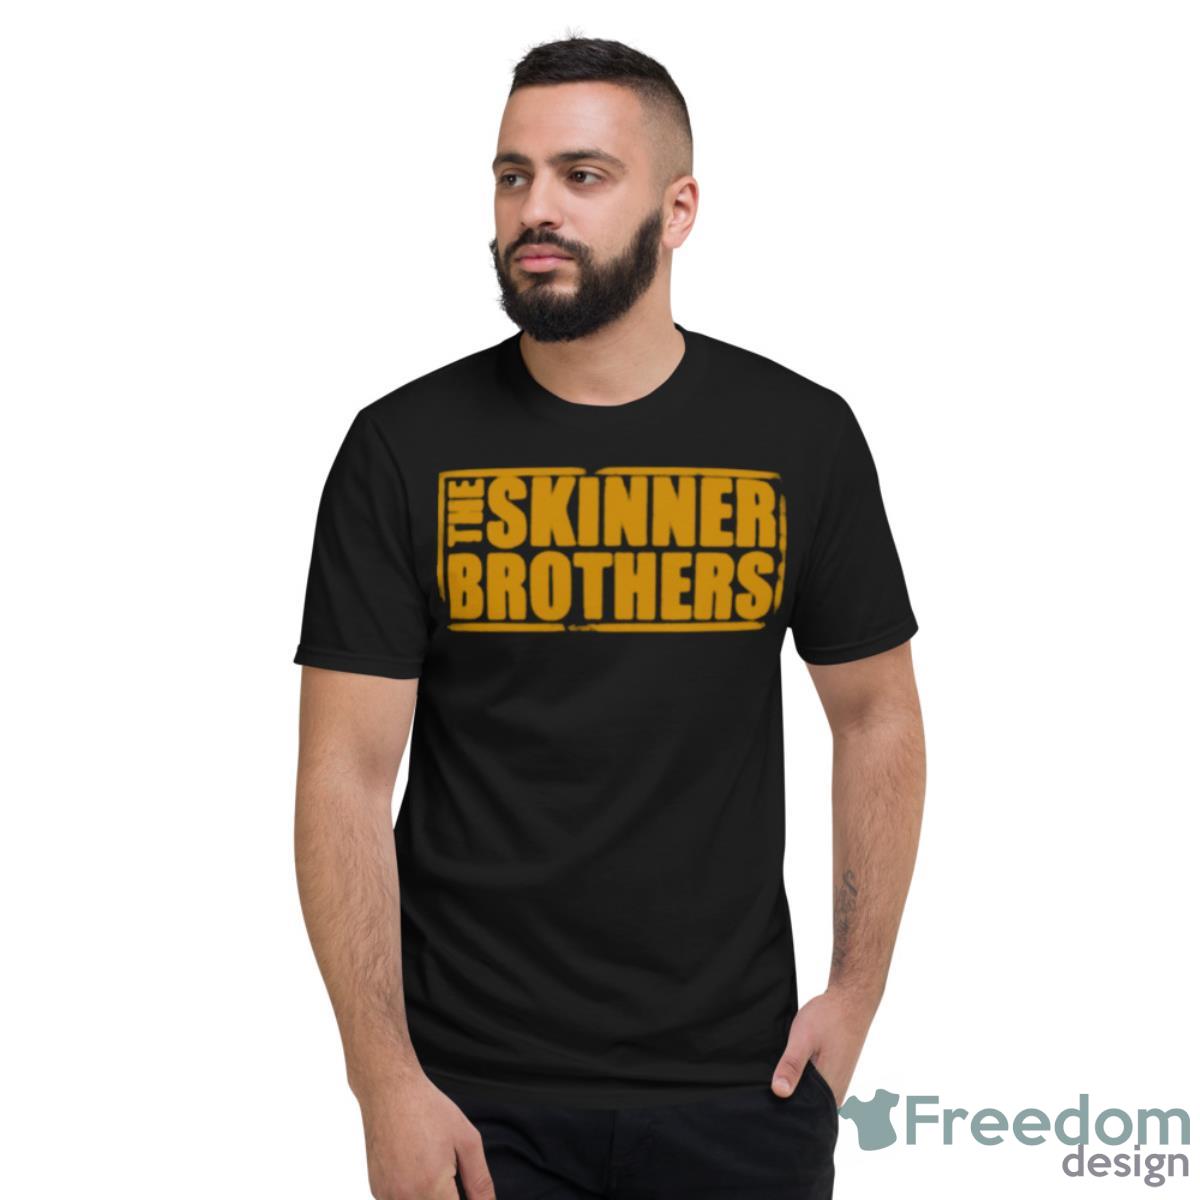 The Skinner Brothers Shirt